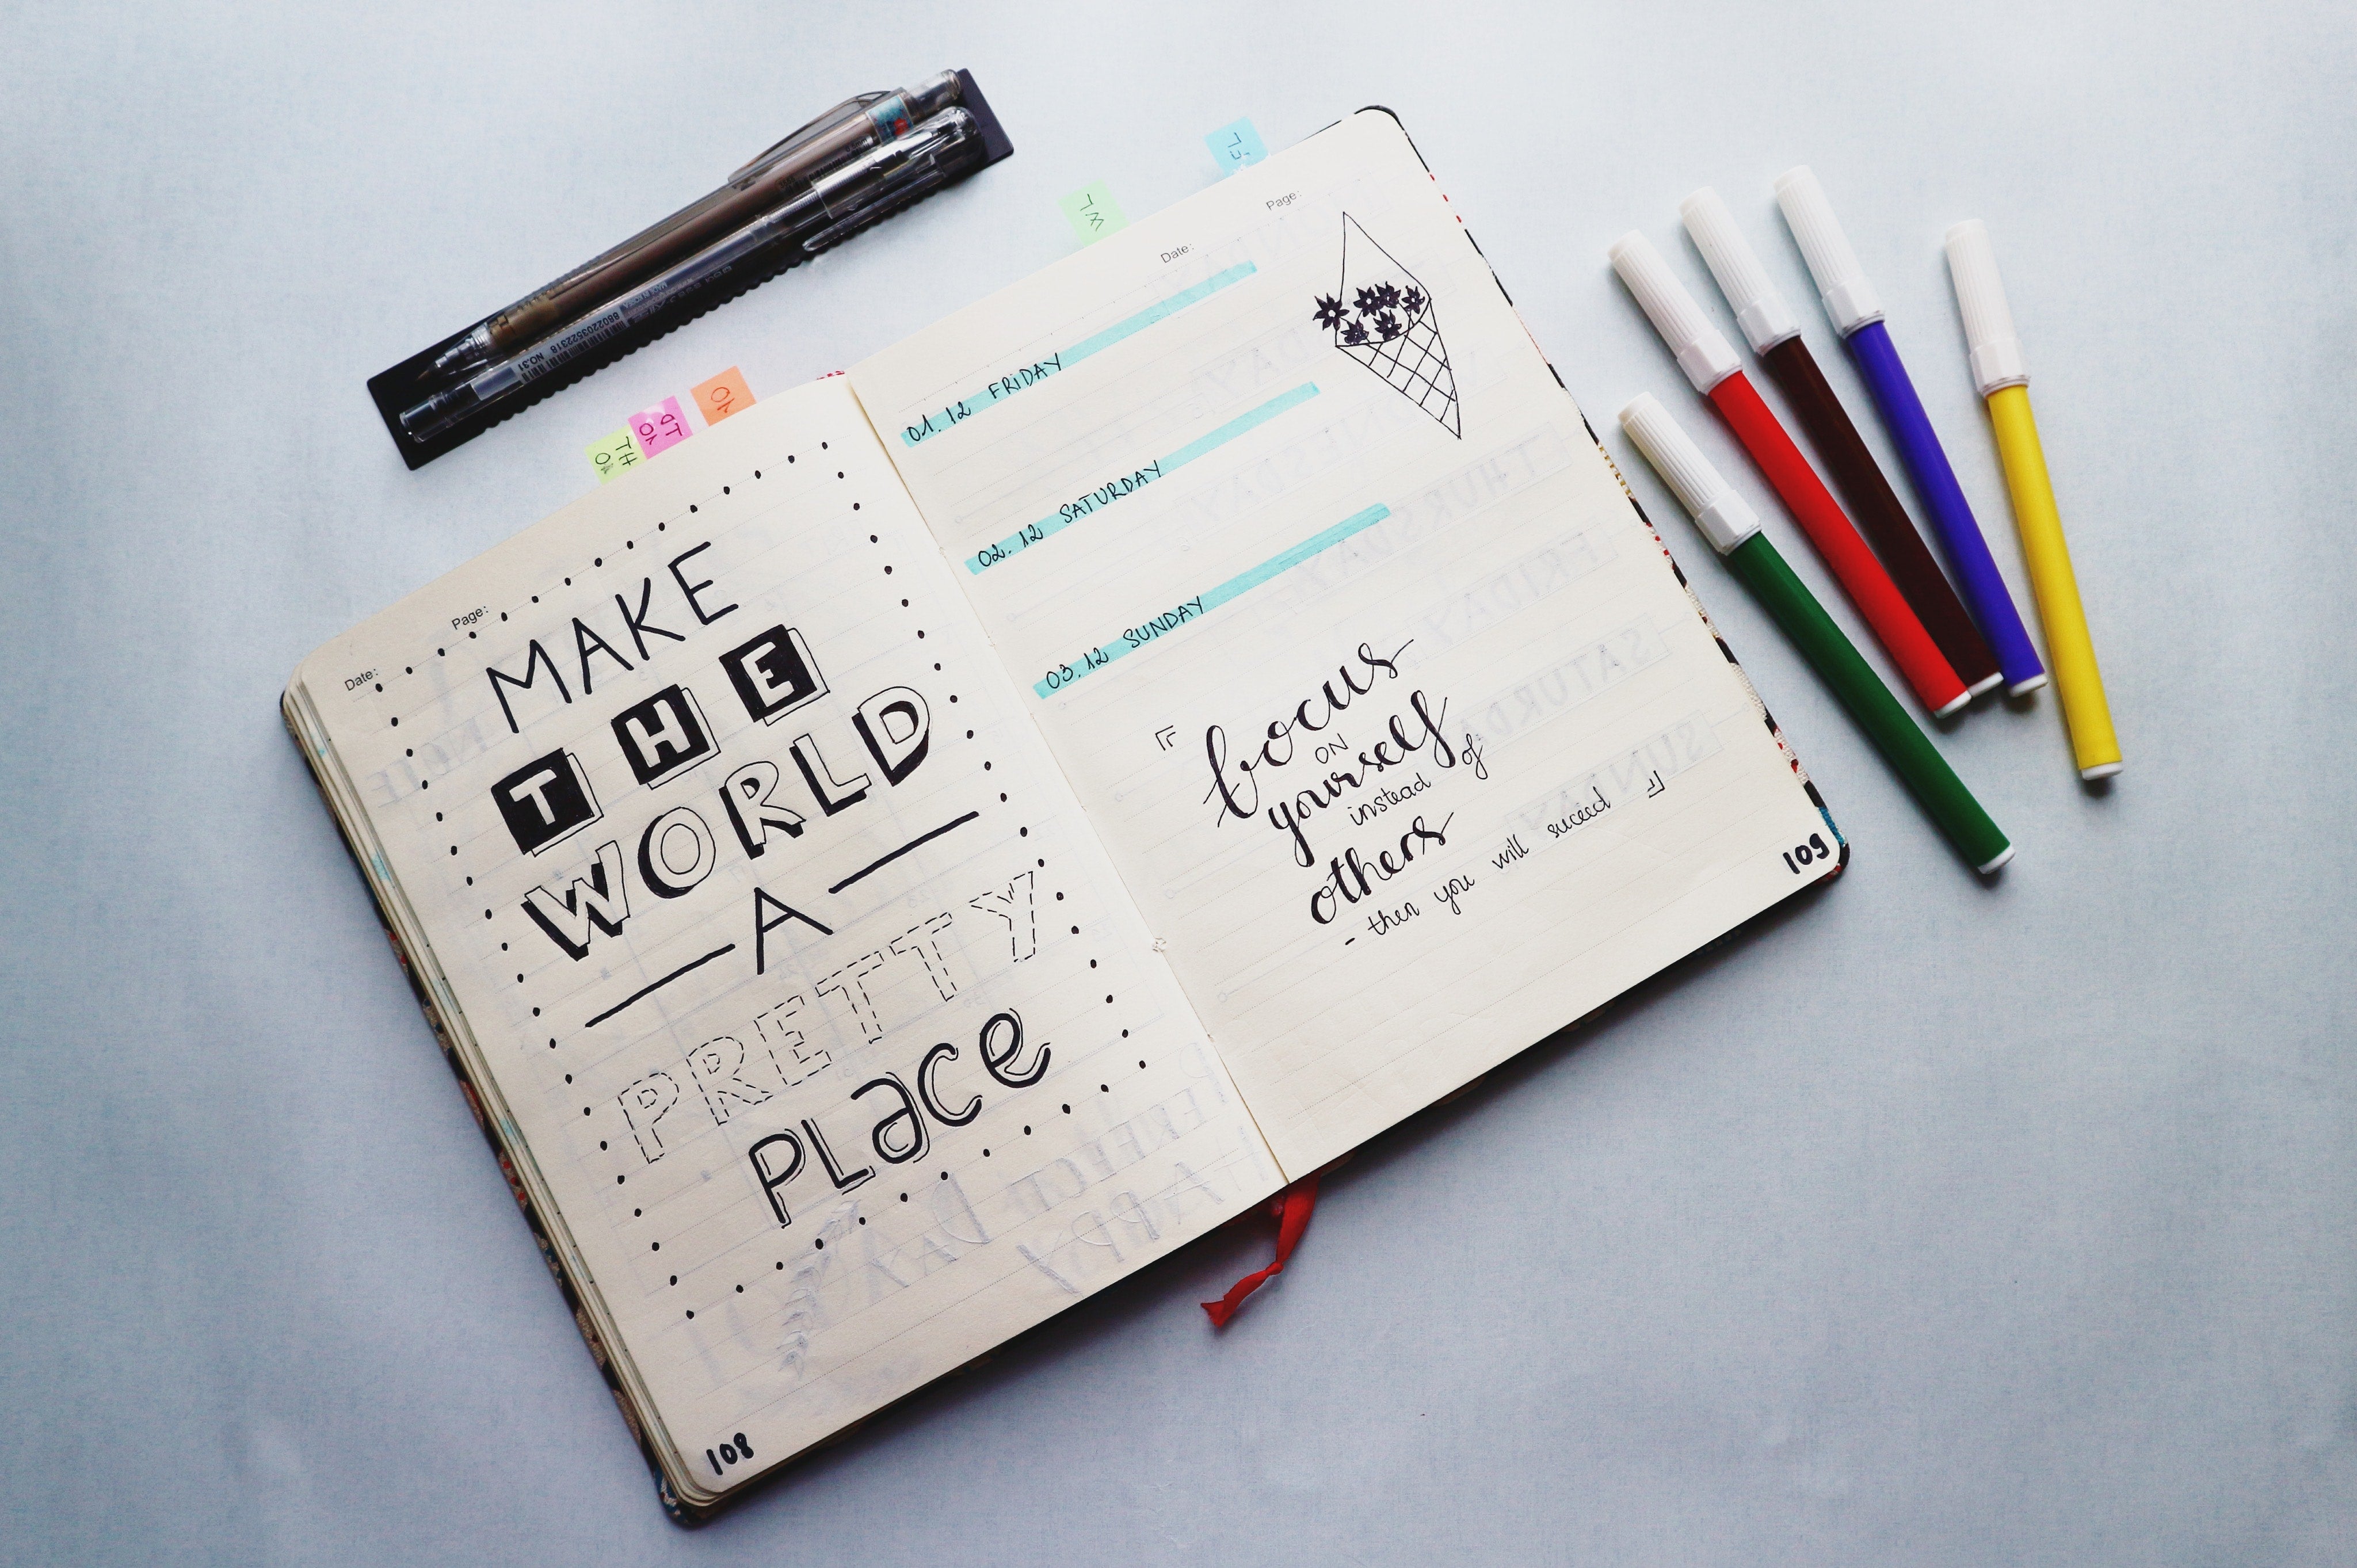 What Is a Bullet Journal? - How to Set Up and Start Your BuJo for 2022